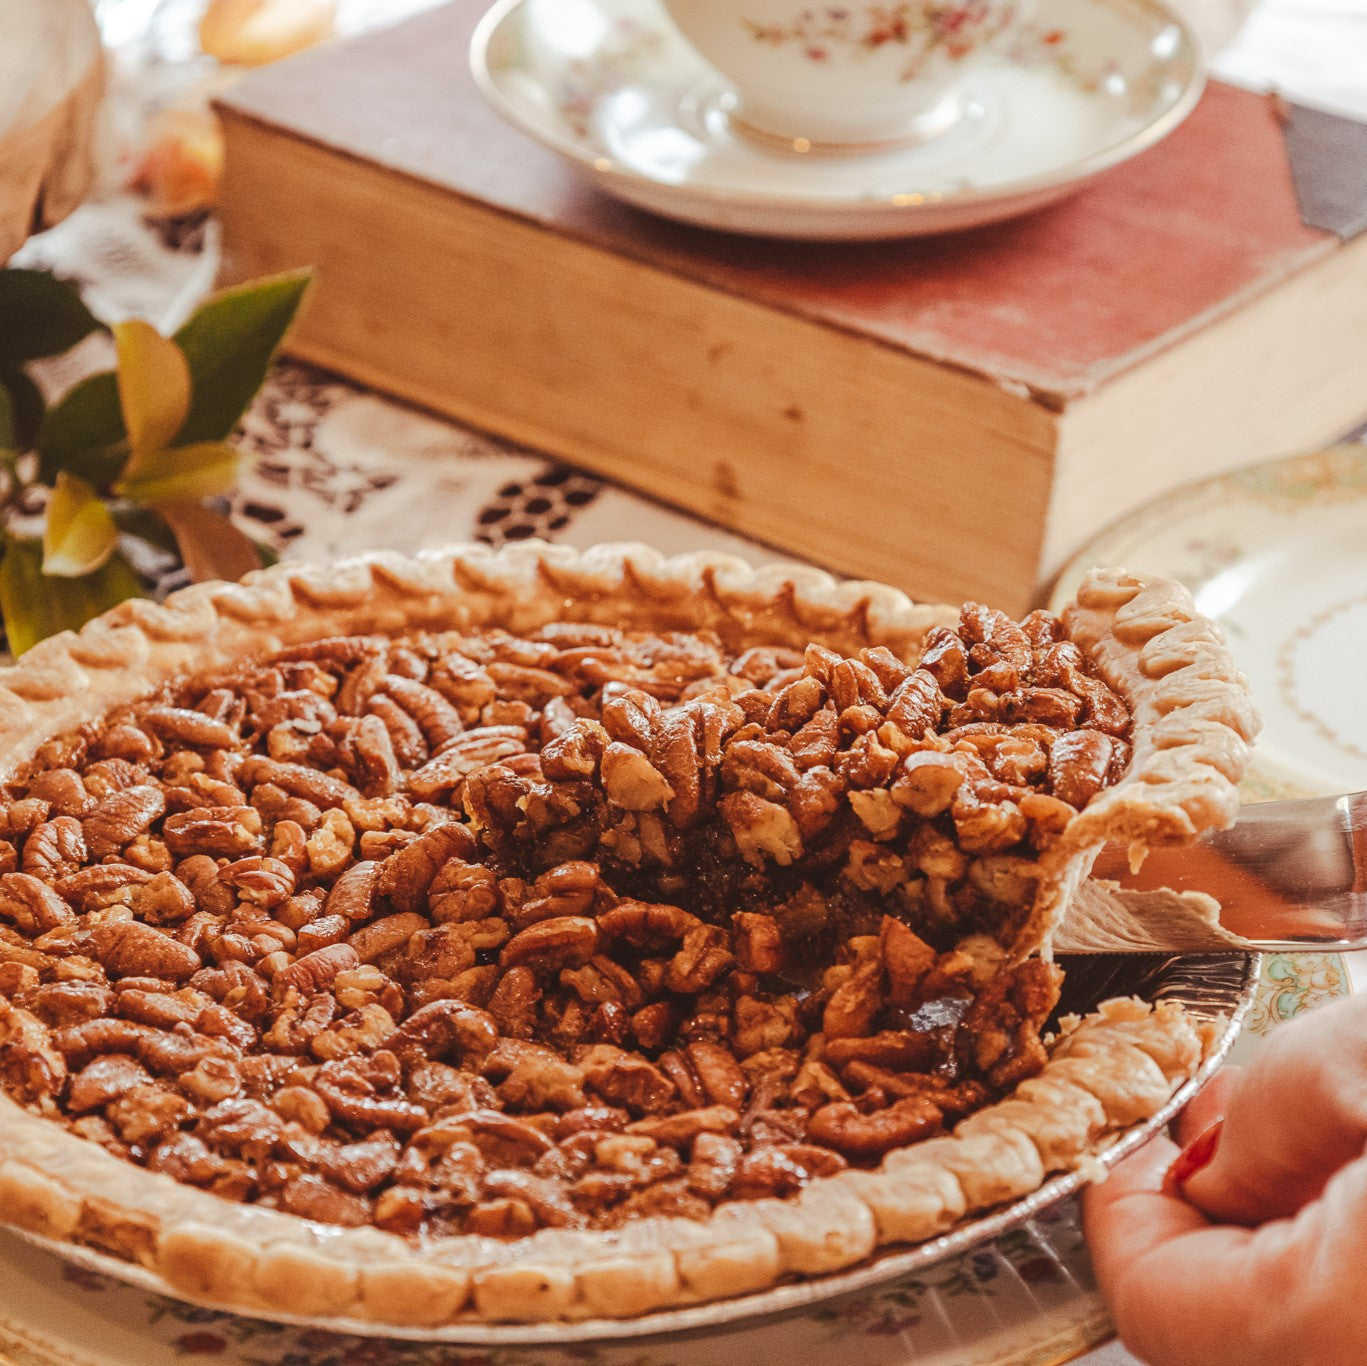 Old Fashioned Chocolate Pecan Pie